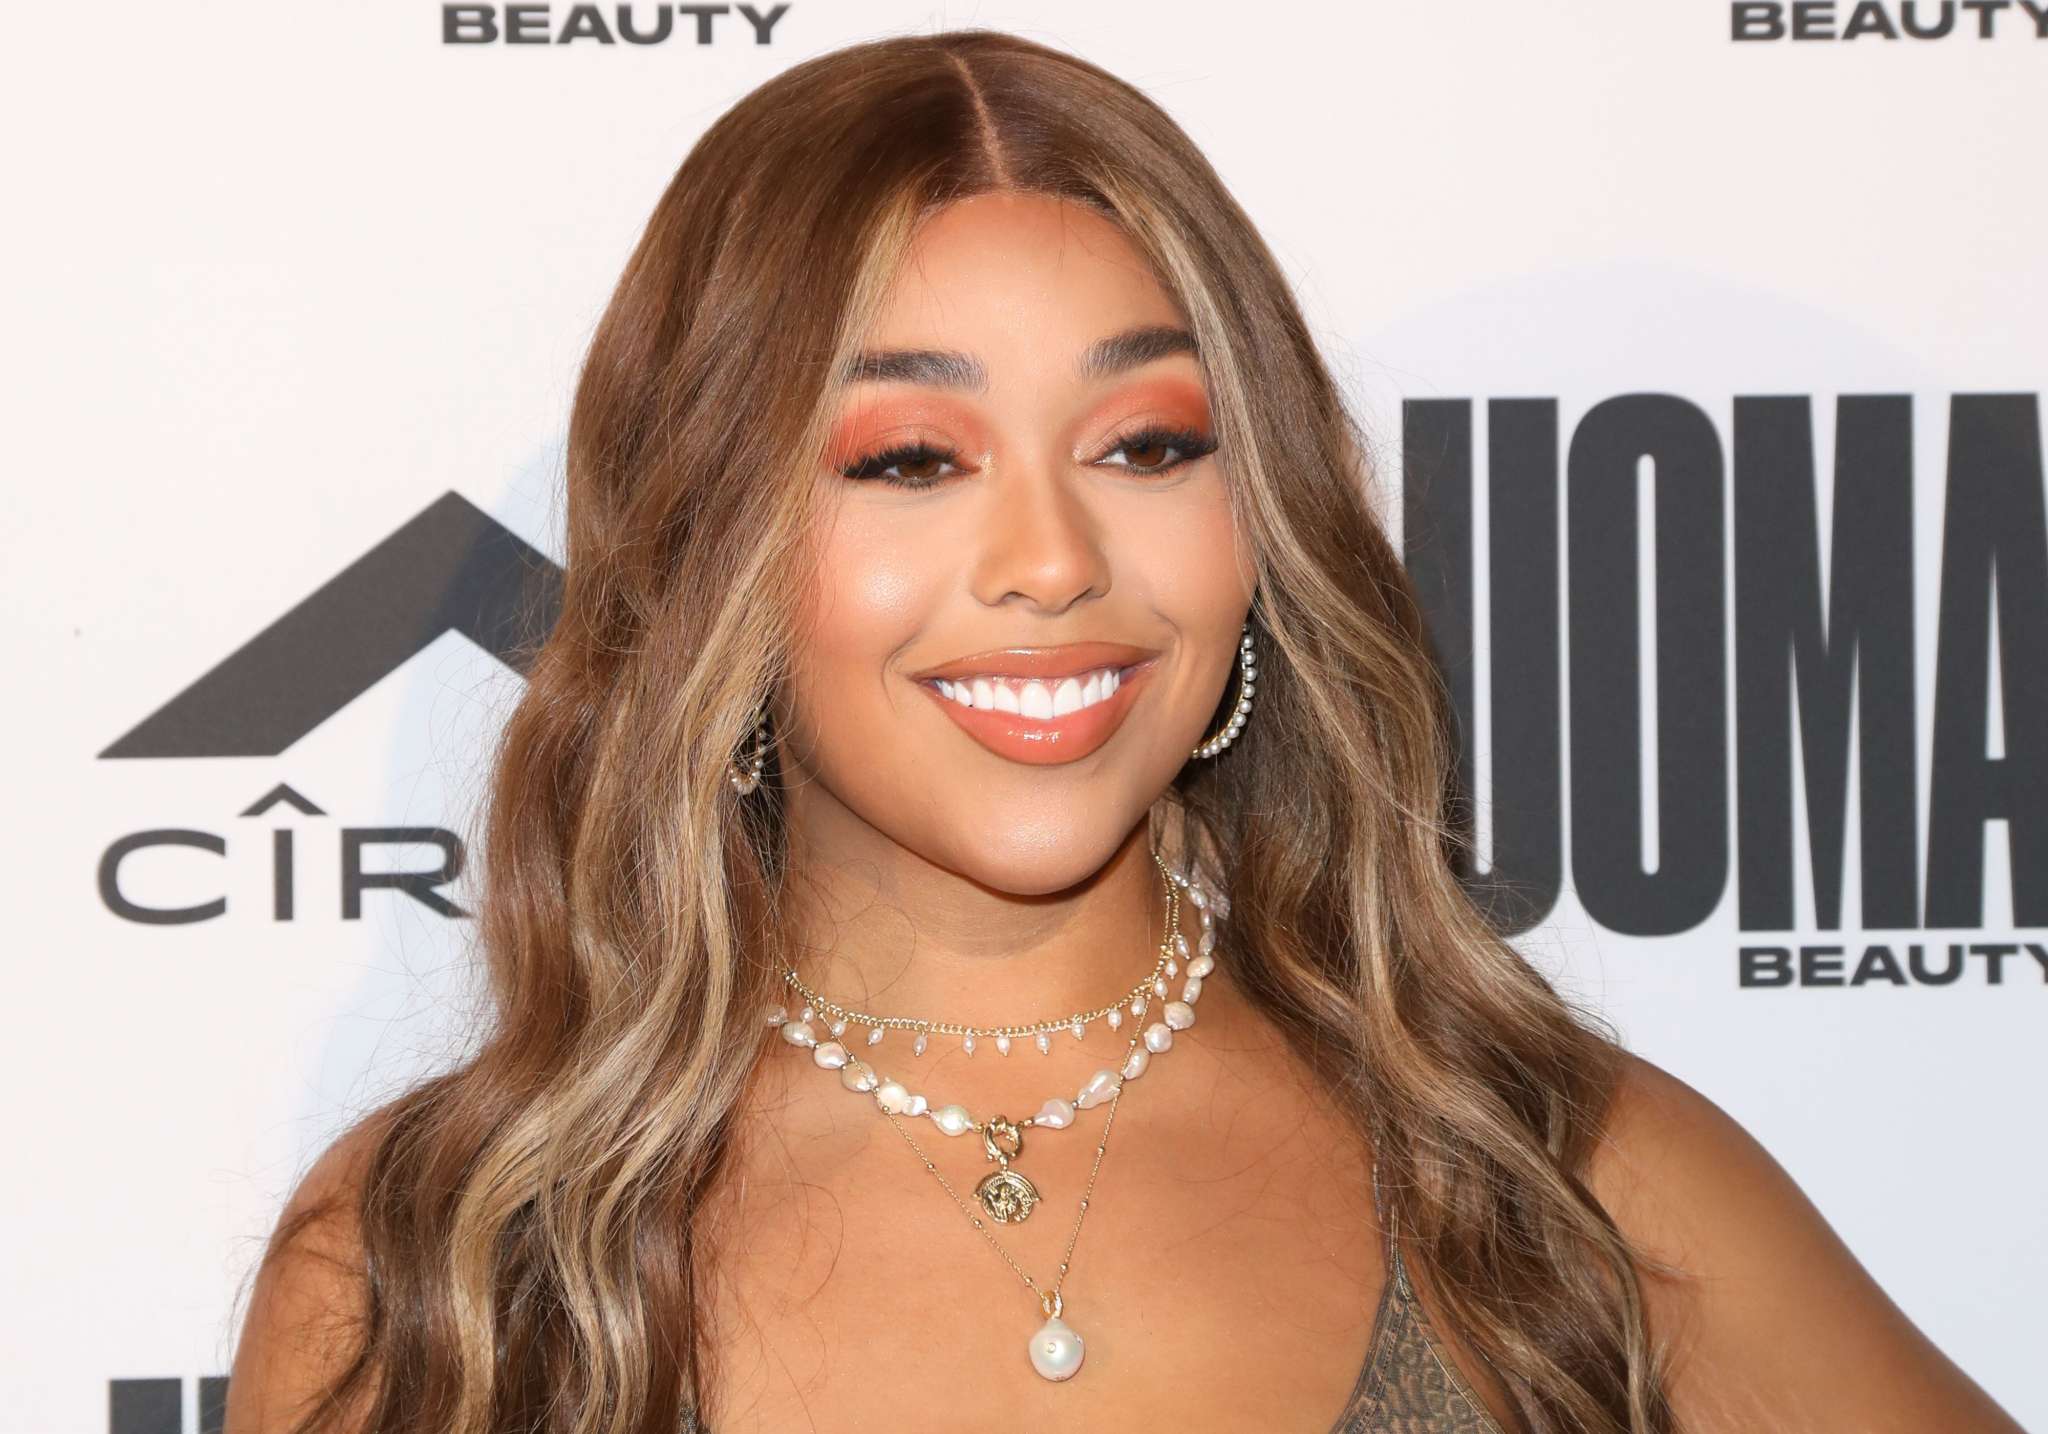 jordyn-woods-shares-her-beauty-routine-and-fans-are-in-awe